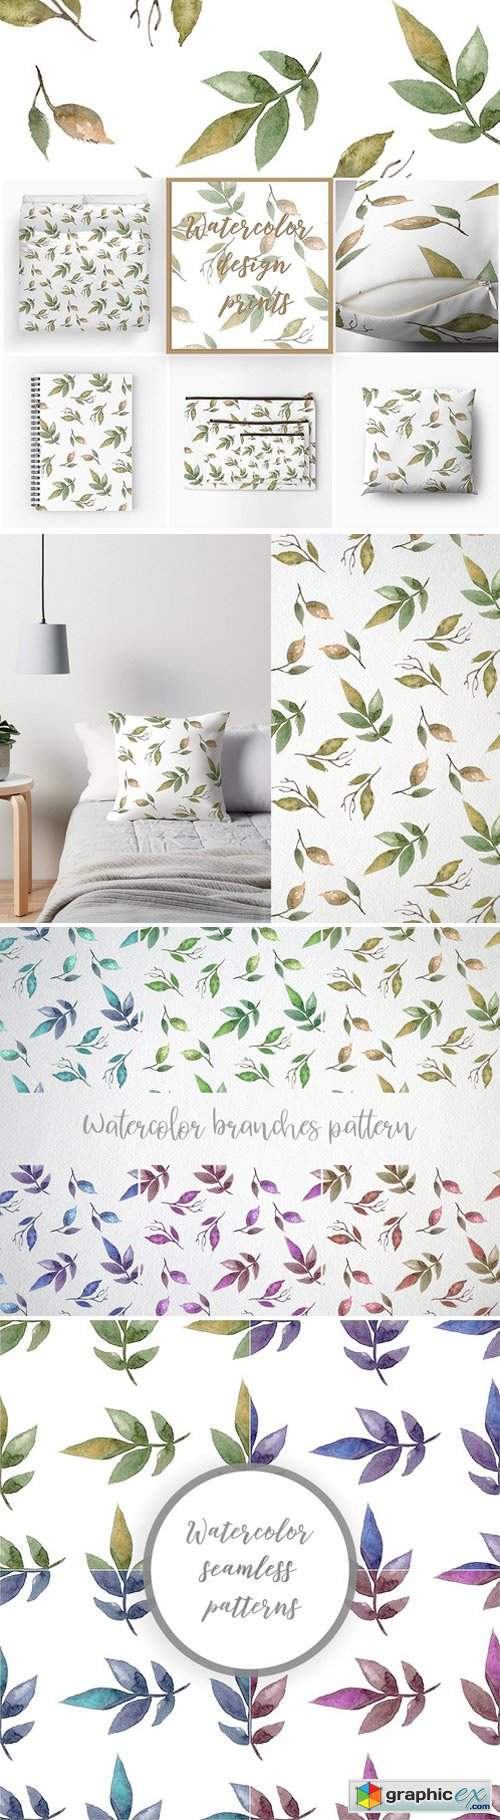 Watercolor branches pattern